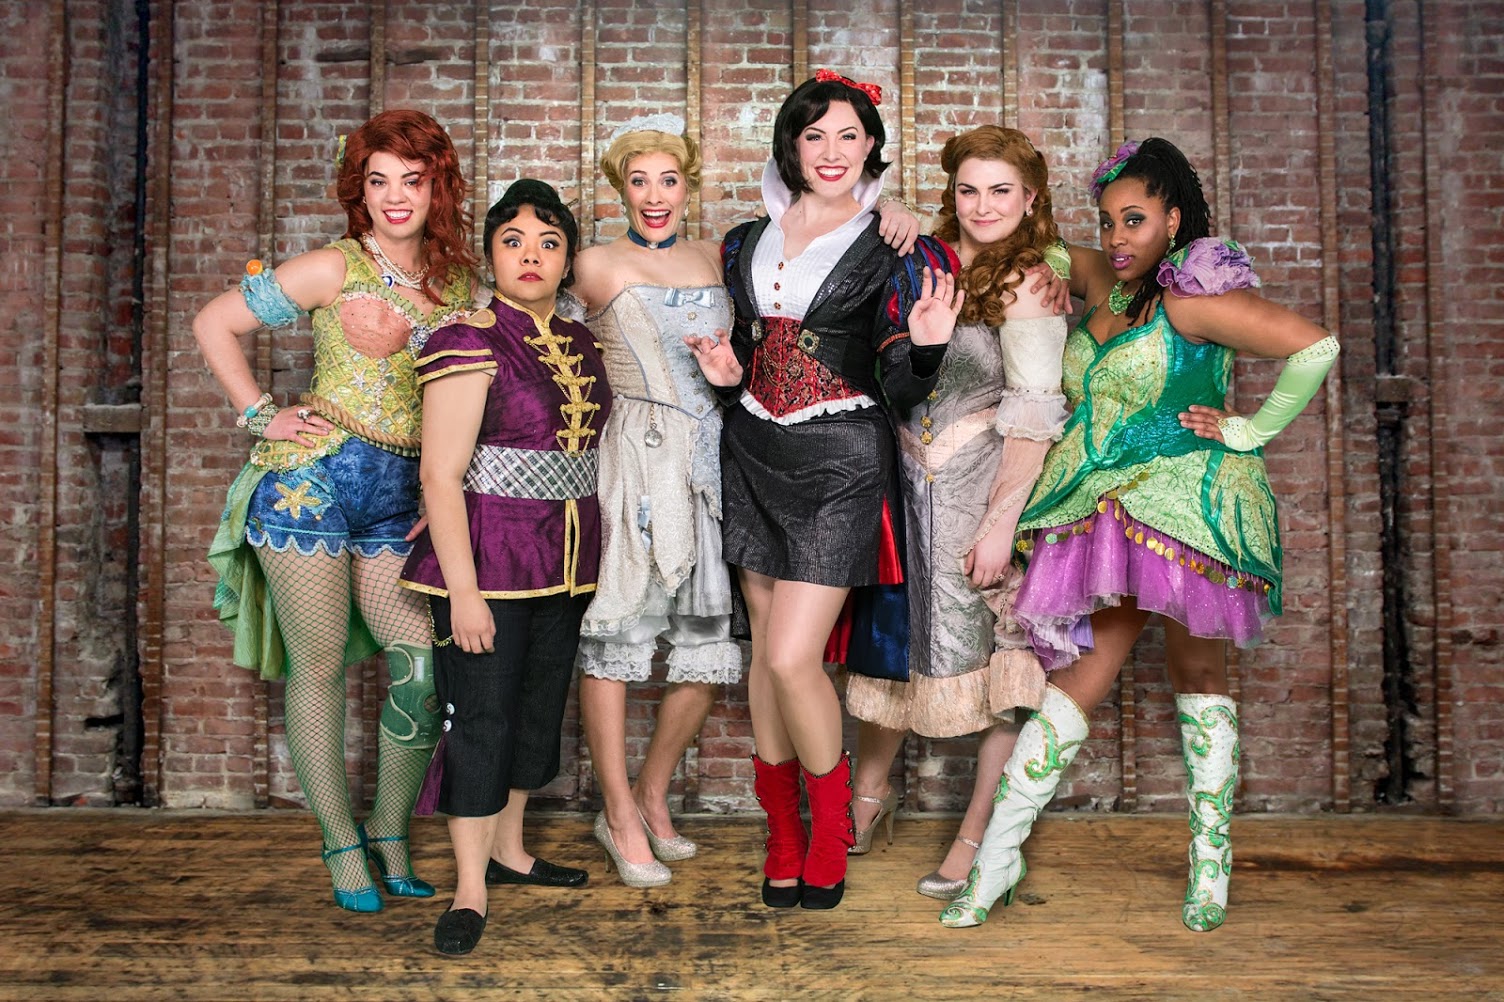 Broadway In Chicago Announced Casting for DISENCHANTED! 1 Broadway In Chicago and Starvox Entertainment are pleased to announce casting for DISENCHANTED!, the hilarious hit musical. Directed by Christopher Bond, DISENCHANTED! will play Chicago’s Broadway Playhouse at Water Tower Place (175 E. Chestnut) May 10 through June 5, 2016.